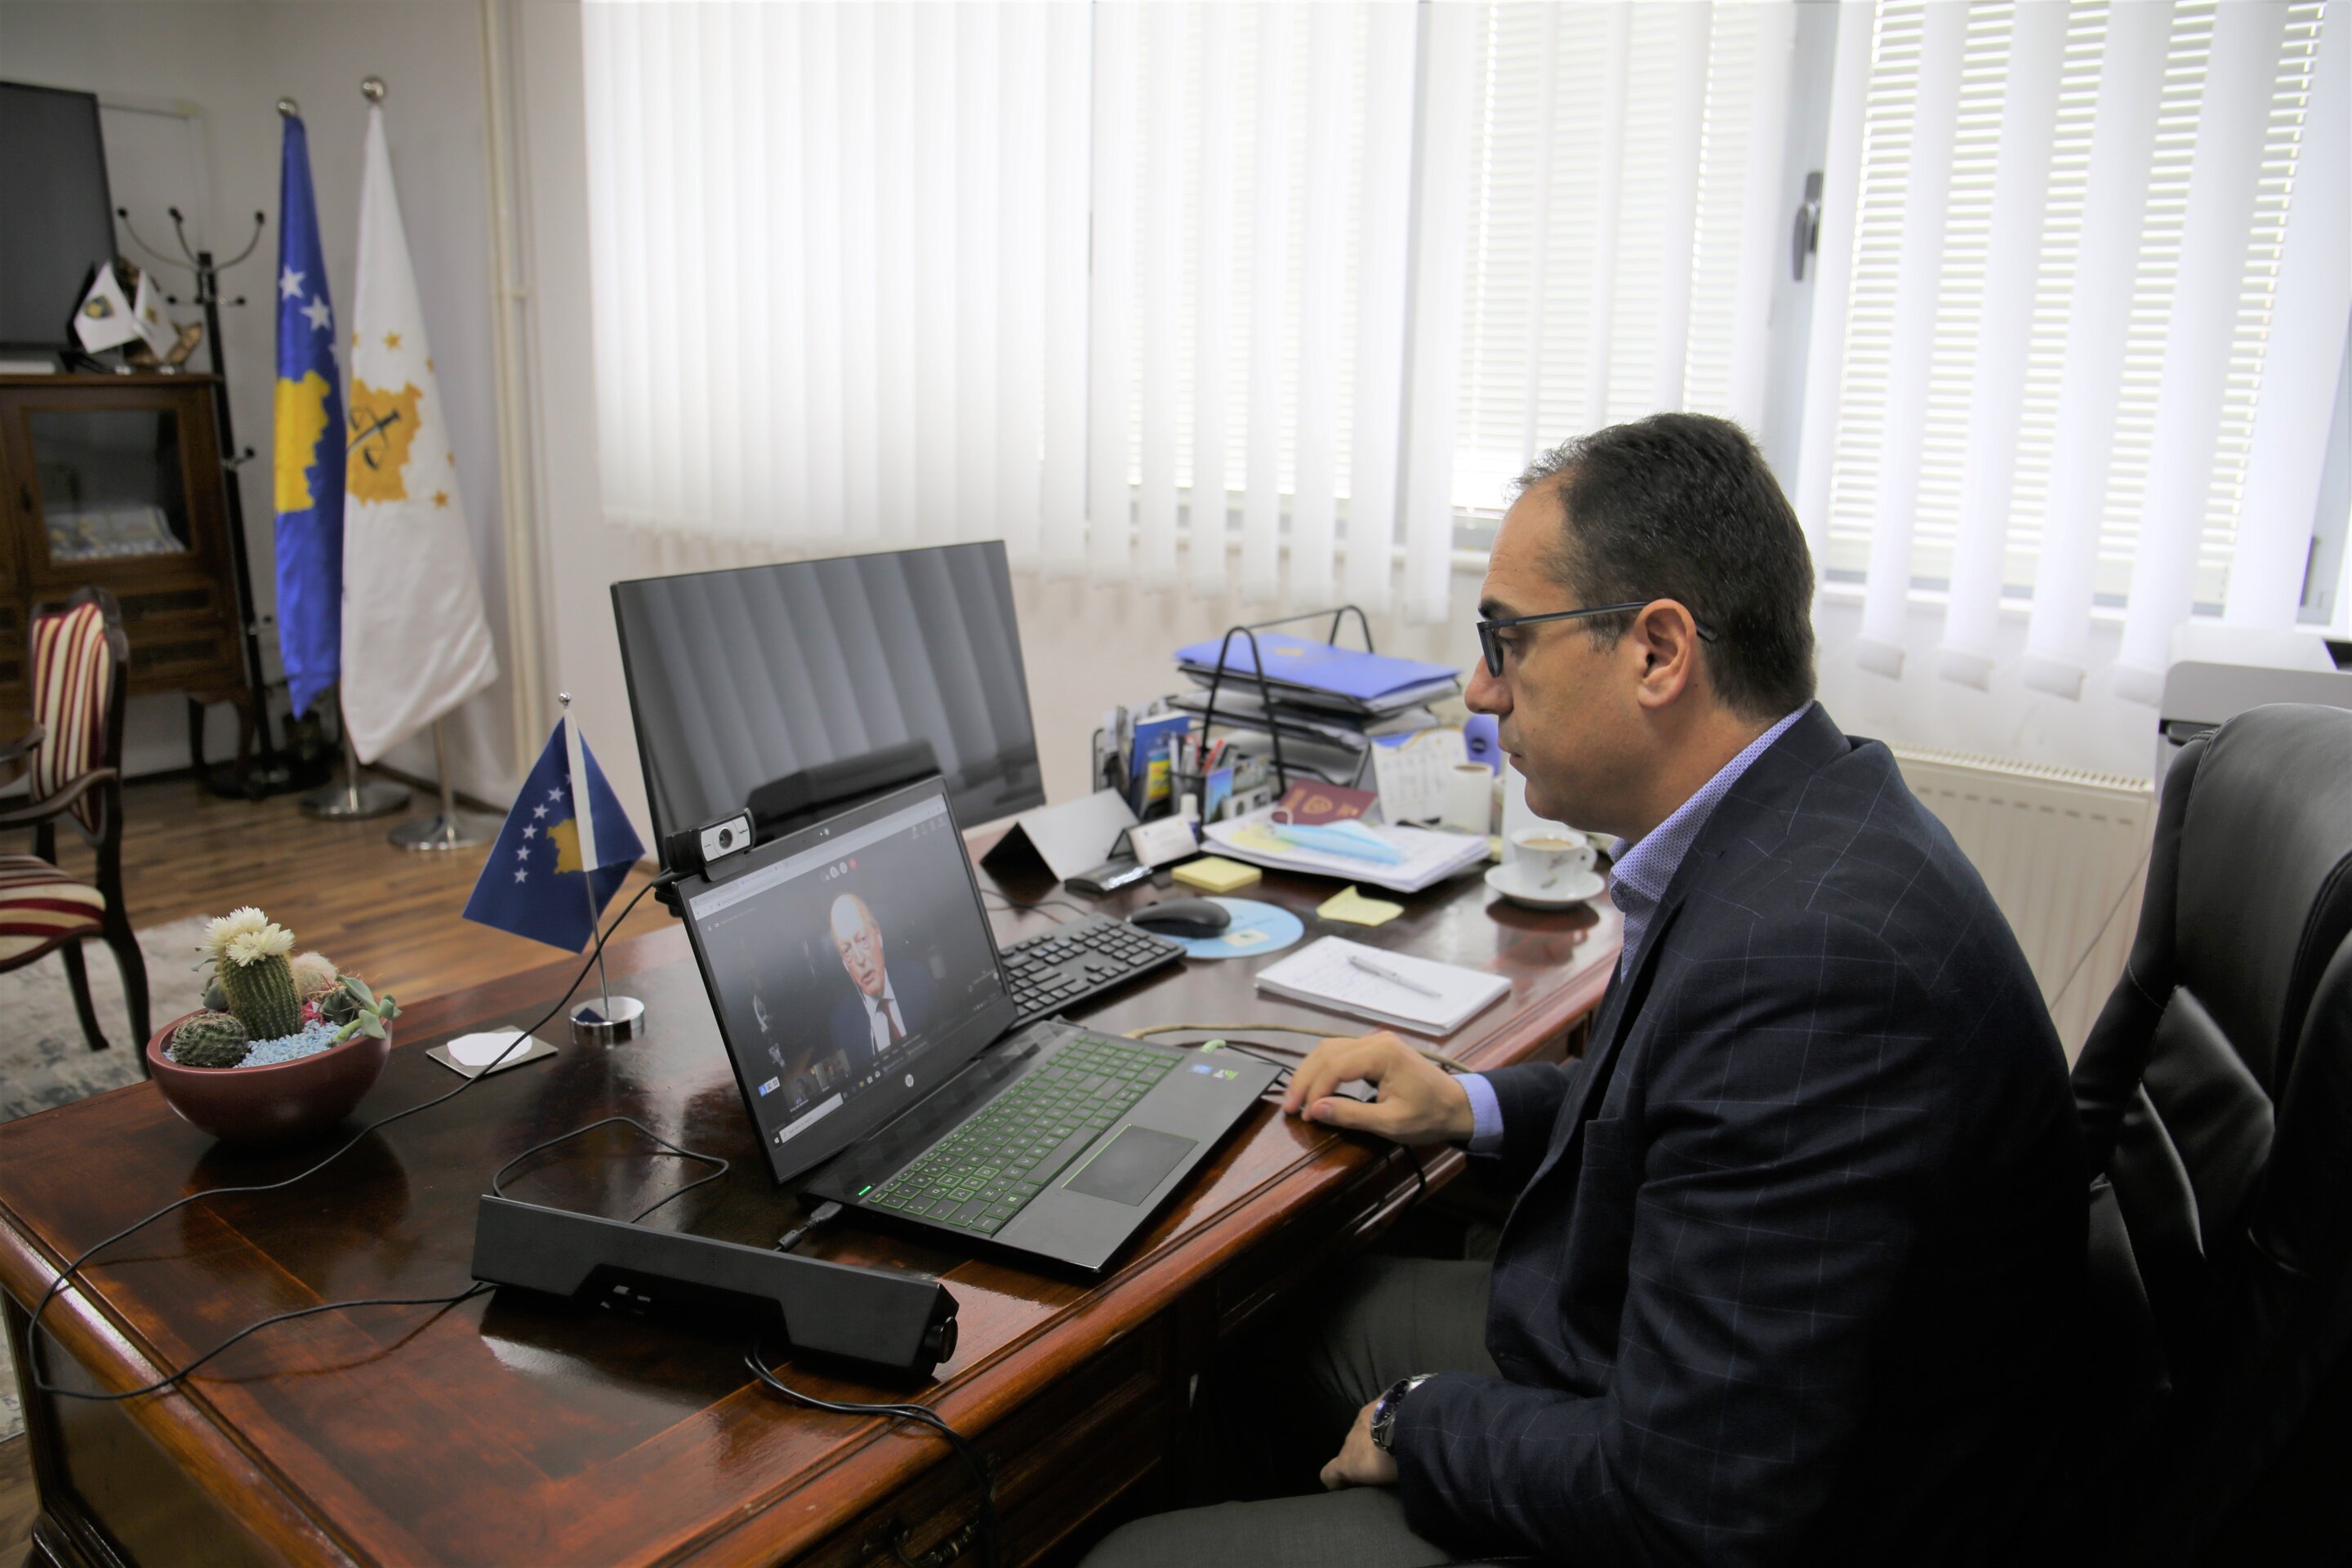 Administrative capacity building of the prosecutorial system  is discussed